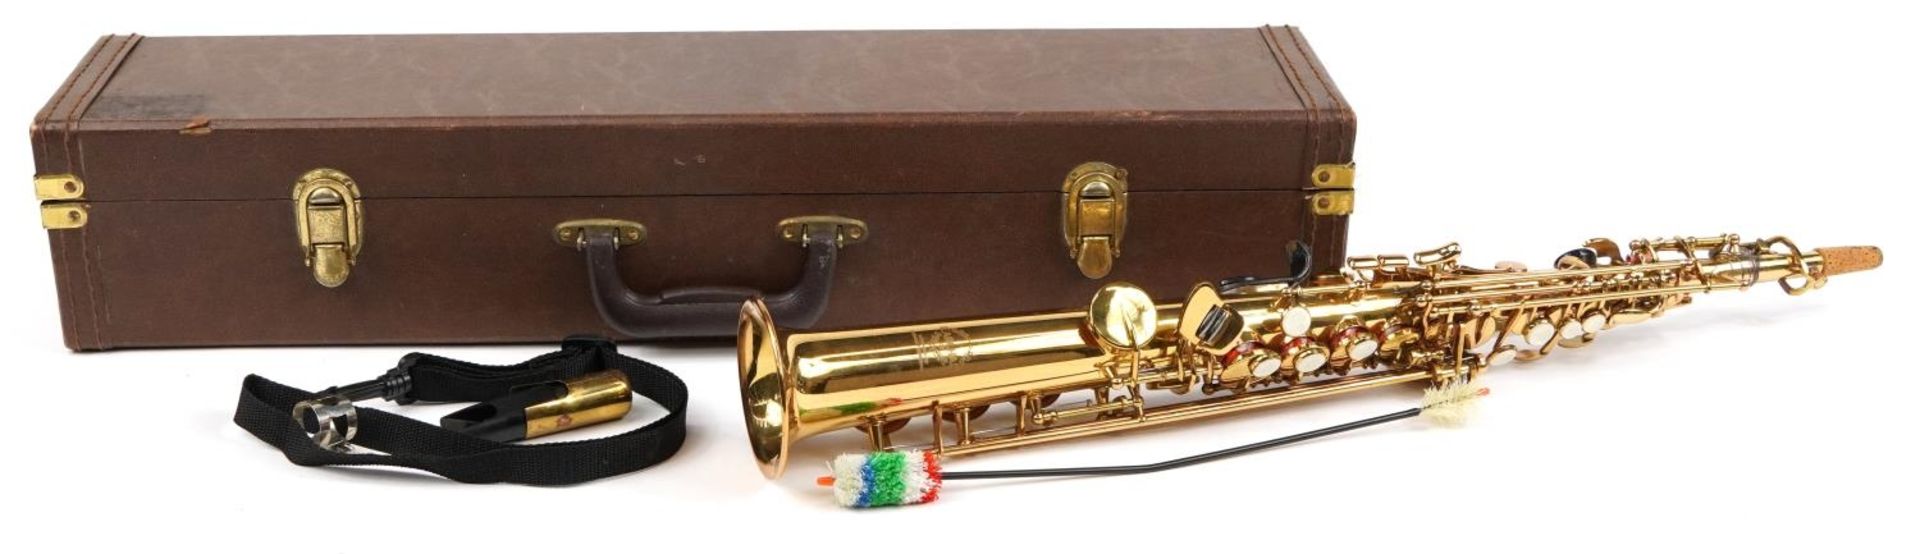 Earlham brass soprano saxophone with fitted case, the saxophone 64cm in length For further